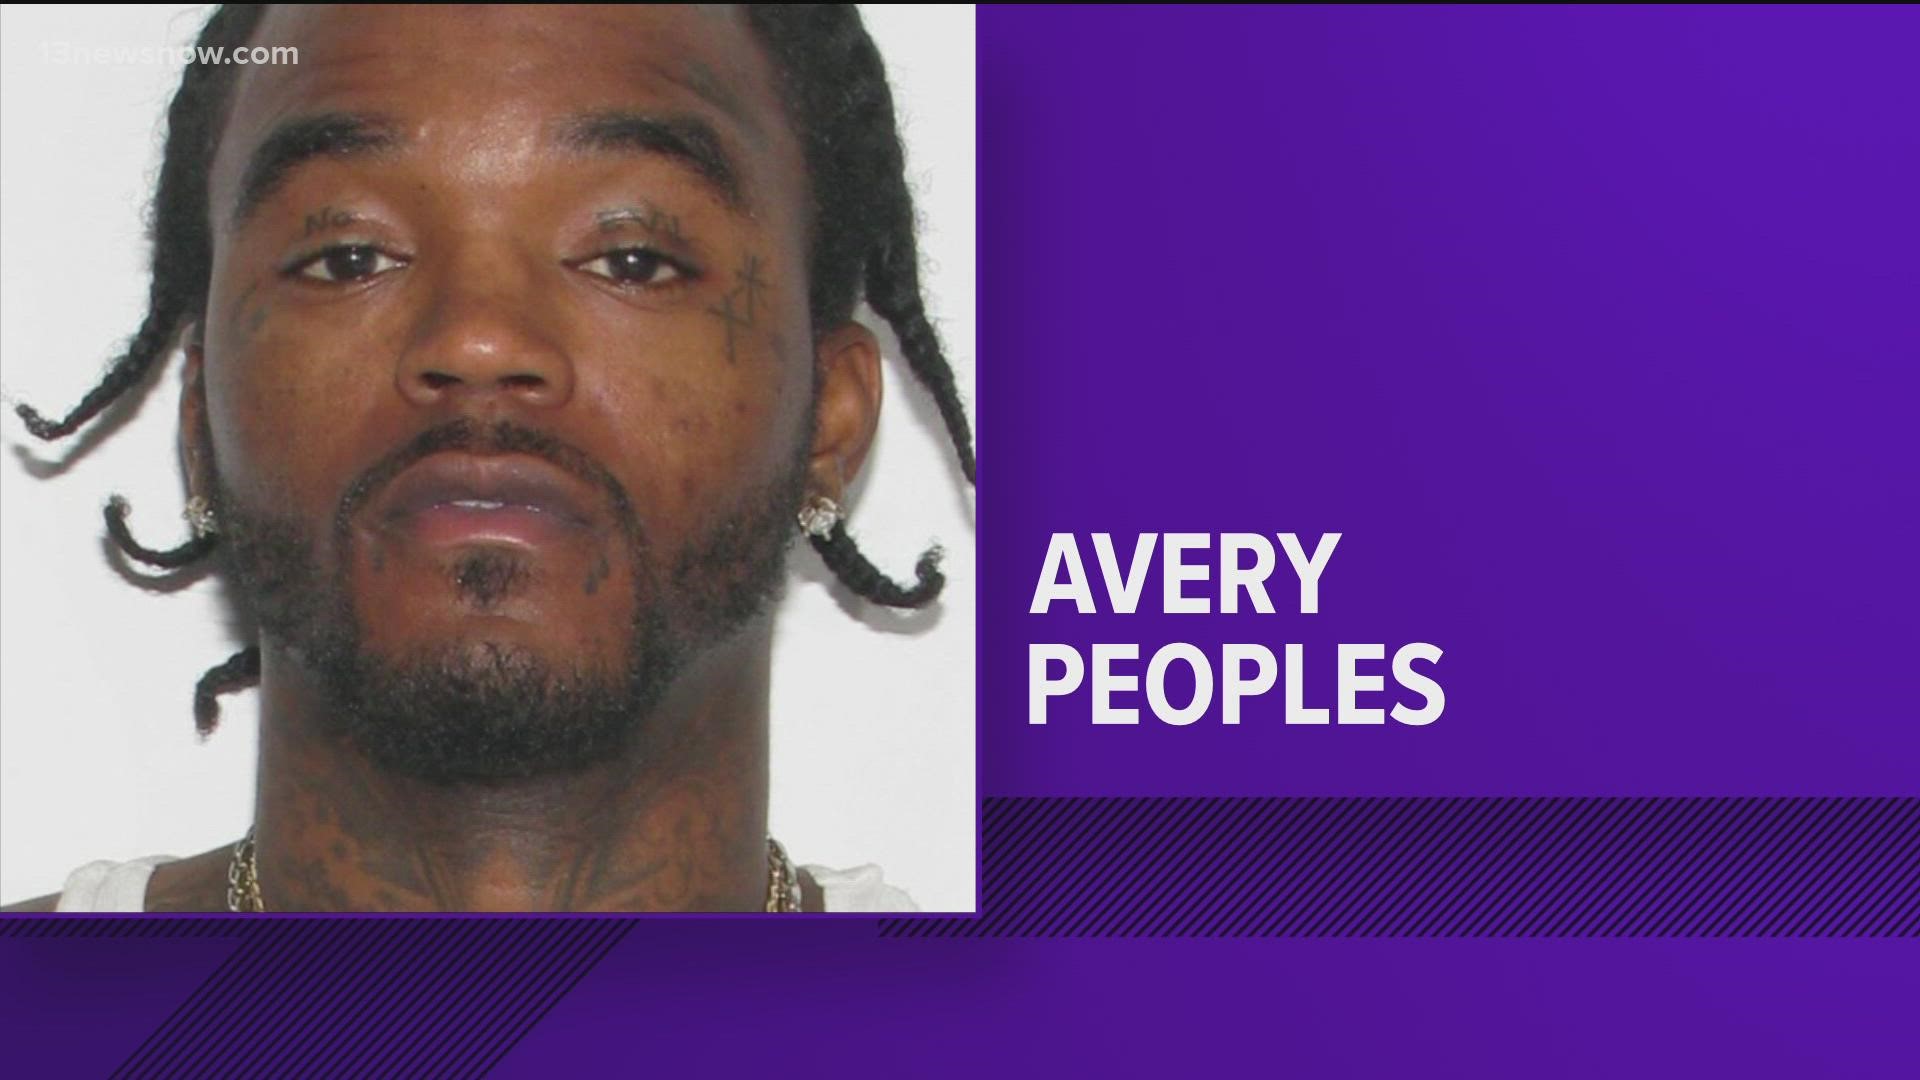 Portsmouth police are searching for a man who's wanted in a deadly double shooting. Avery Peoples is charged with first-degree murder.